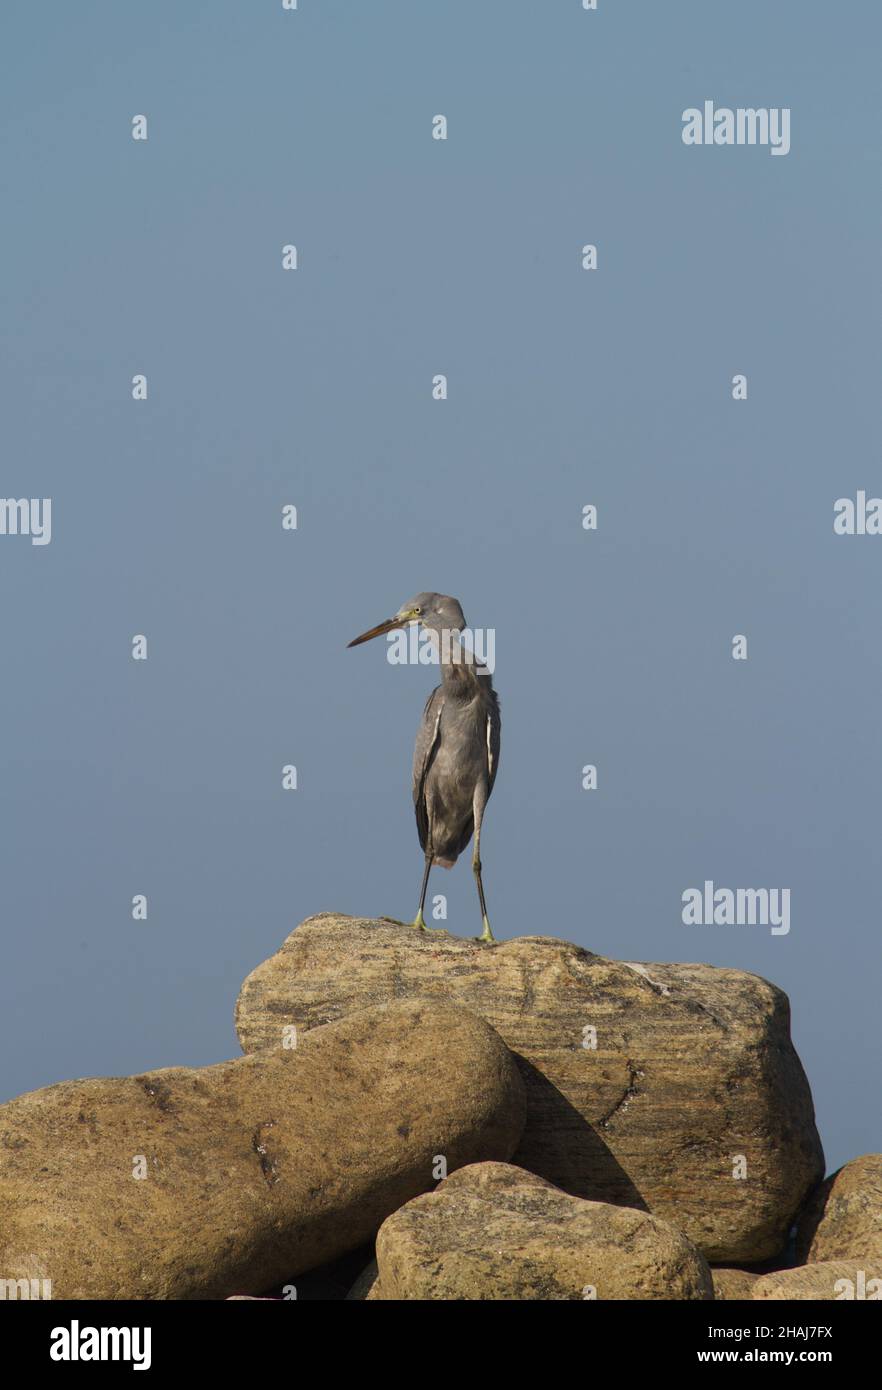 A single grey heron standing on the rock by the seashore Stock Photo